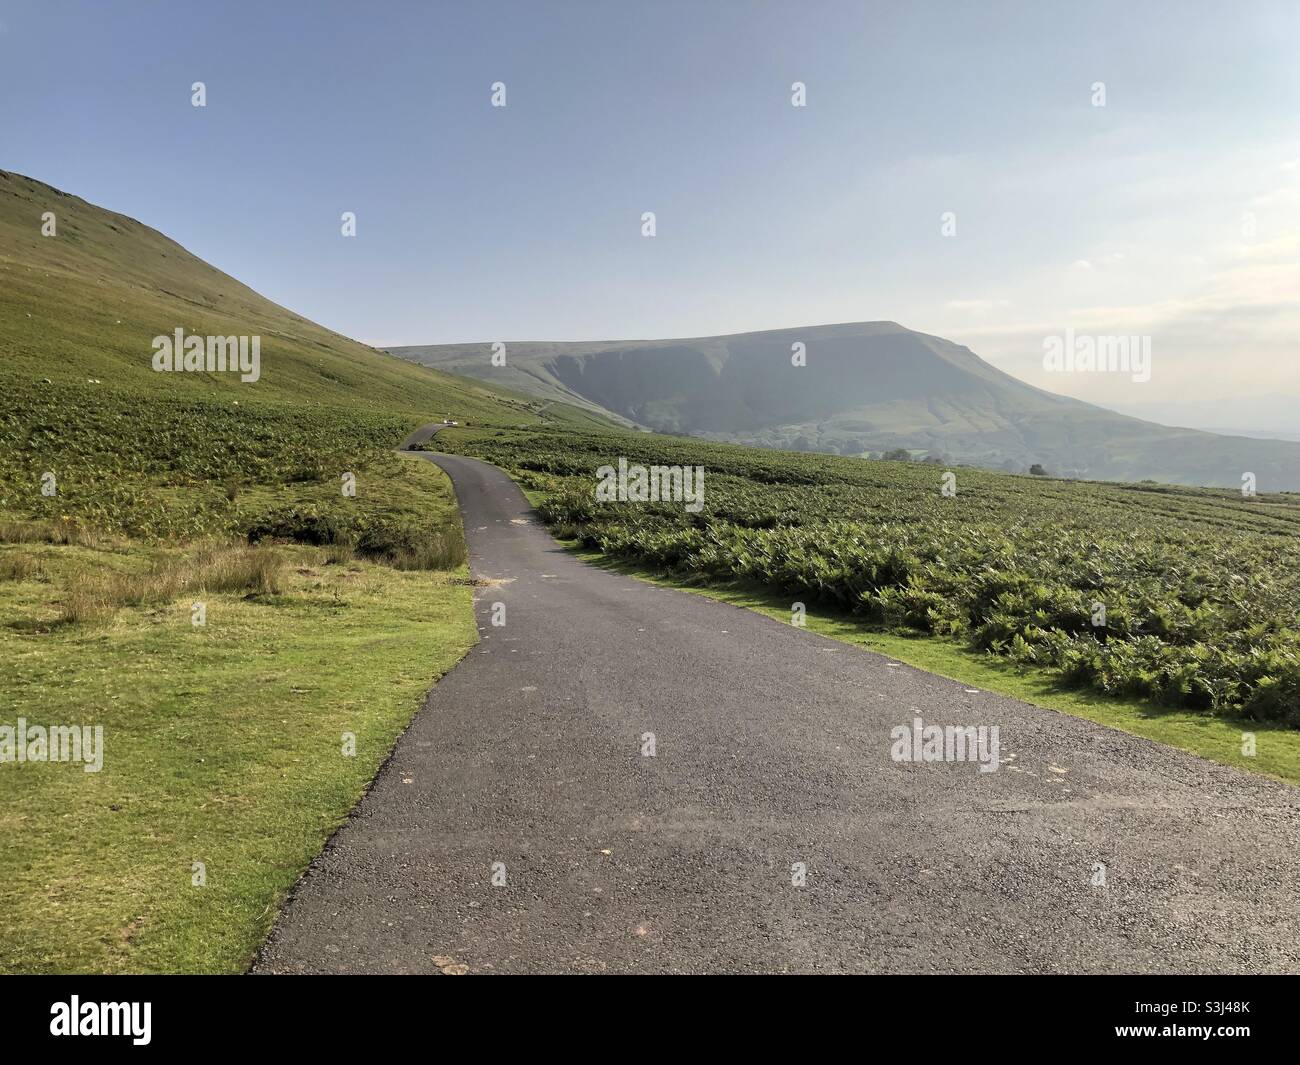 The Gospel Pass in the Black Mountains, Wales. Stock Photo